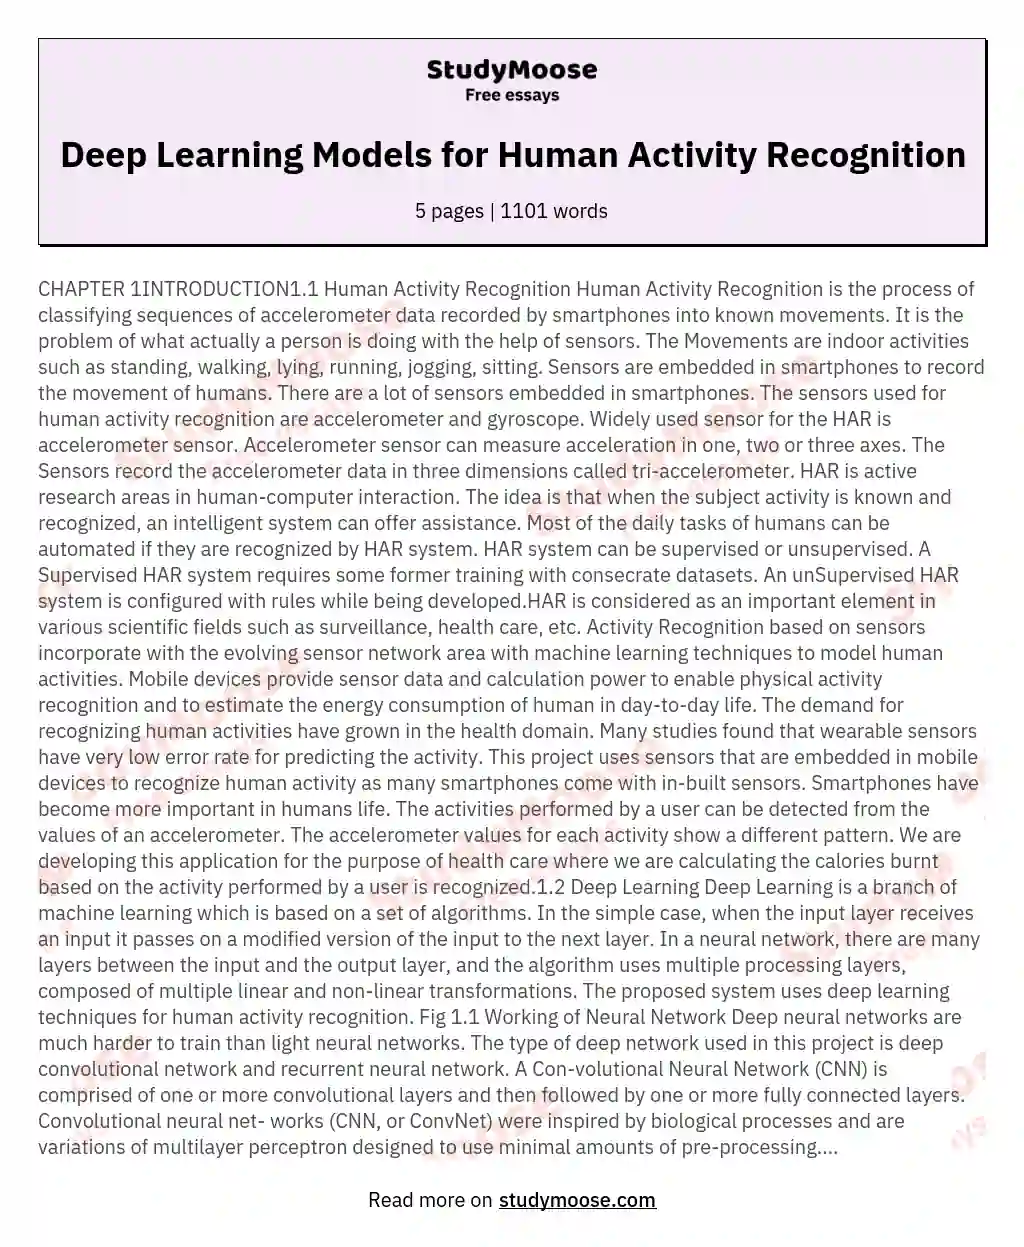 Deep Learning Models for Human Activity Recognition essay